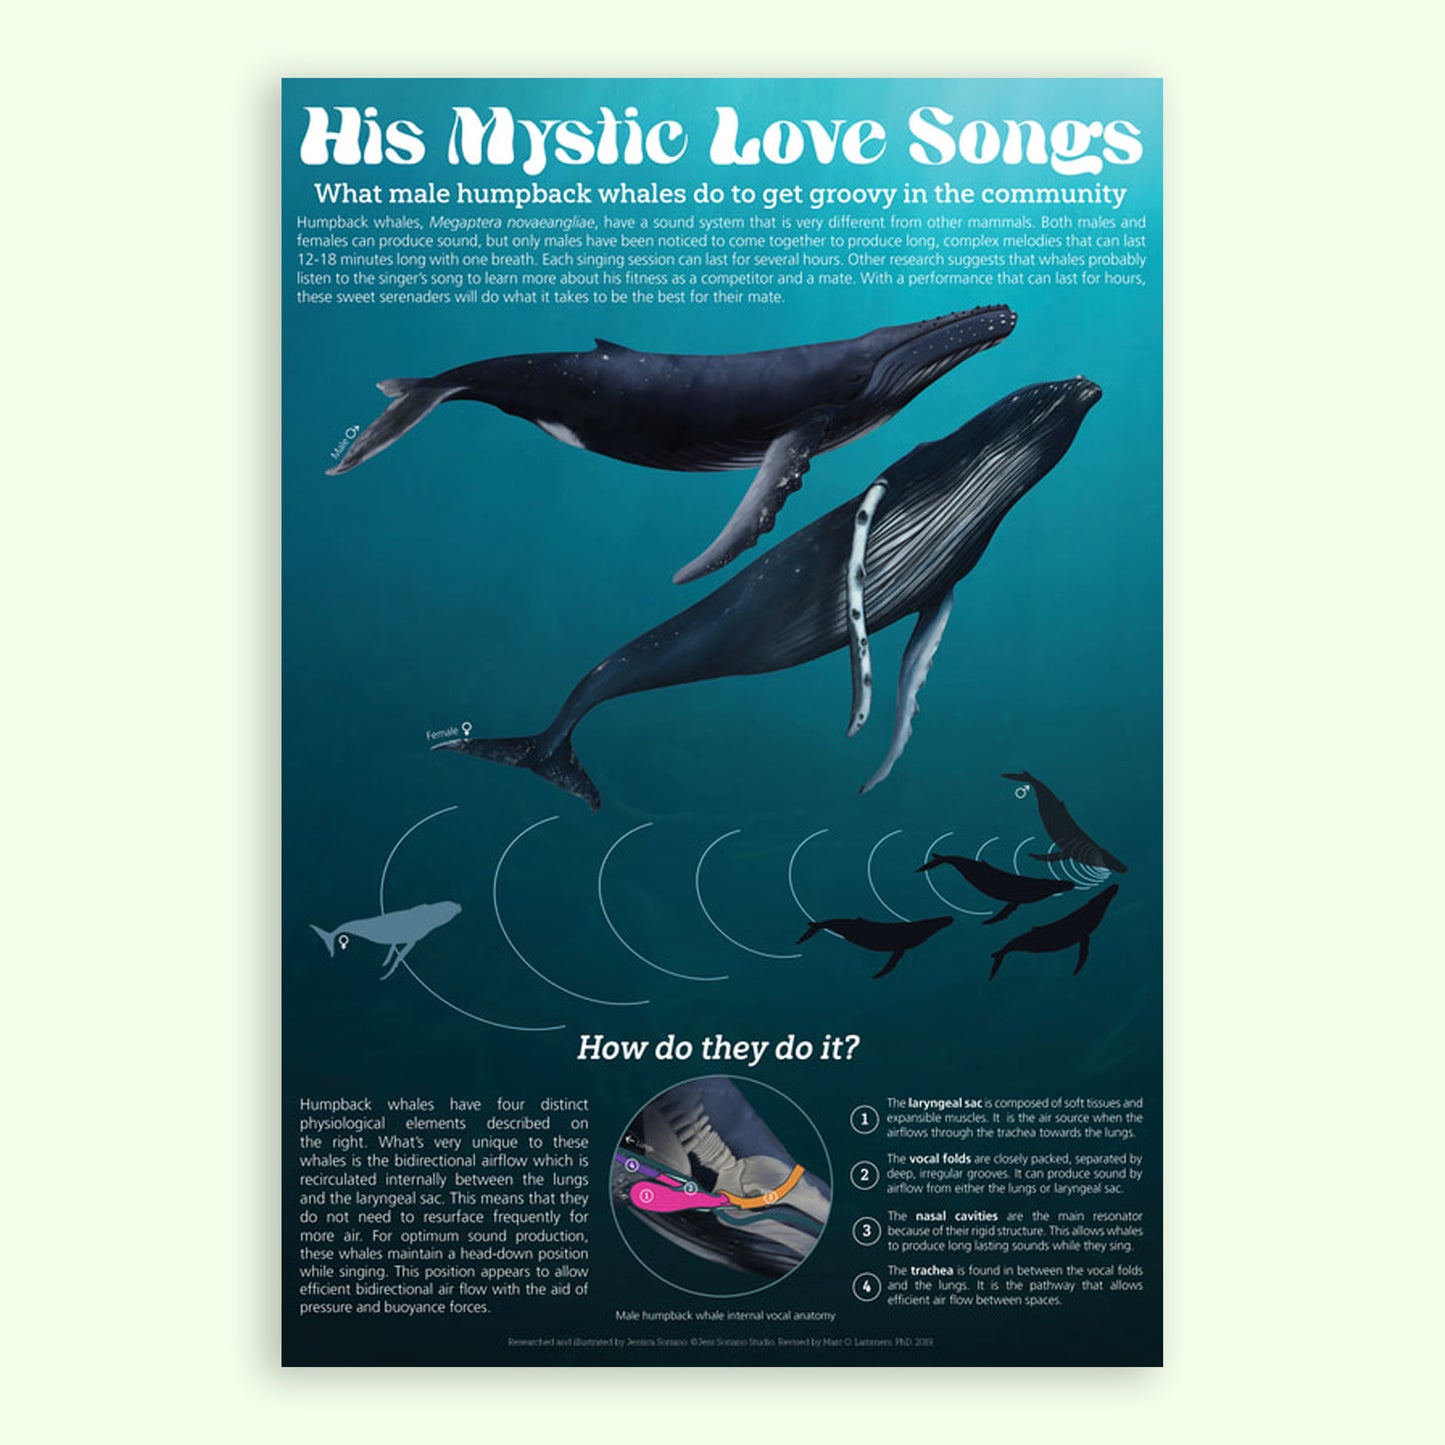 His Mystic Love Songs: The Research Behind Humpback Whale Sound Production Poster